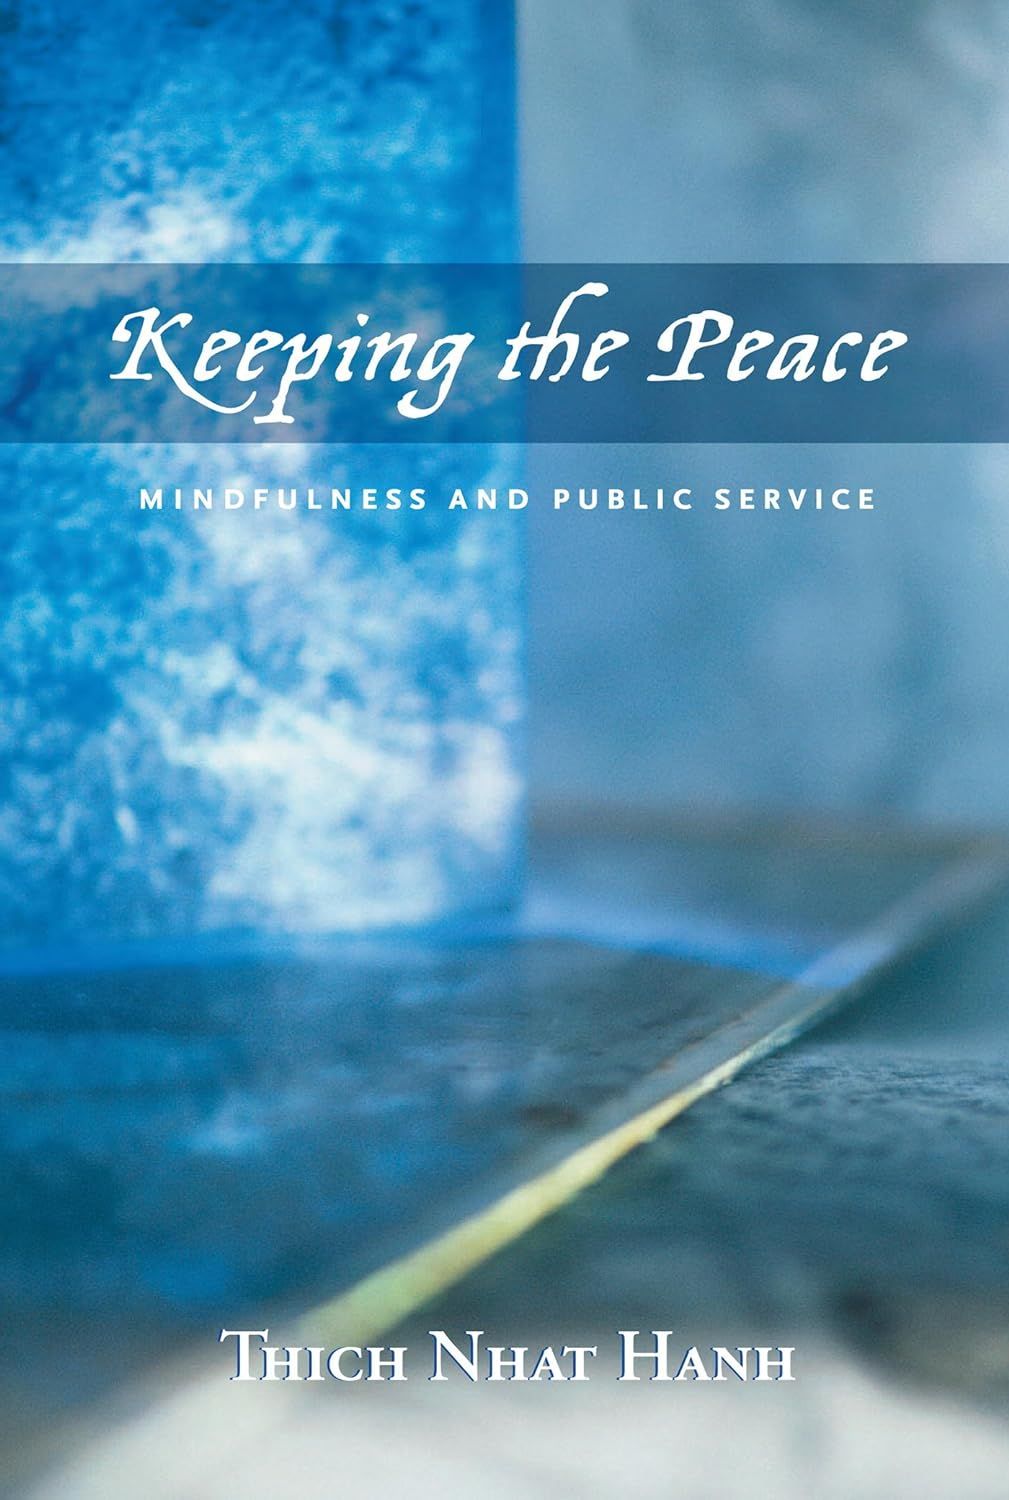  Keeping the Peace: Mindfulness and Public Service 